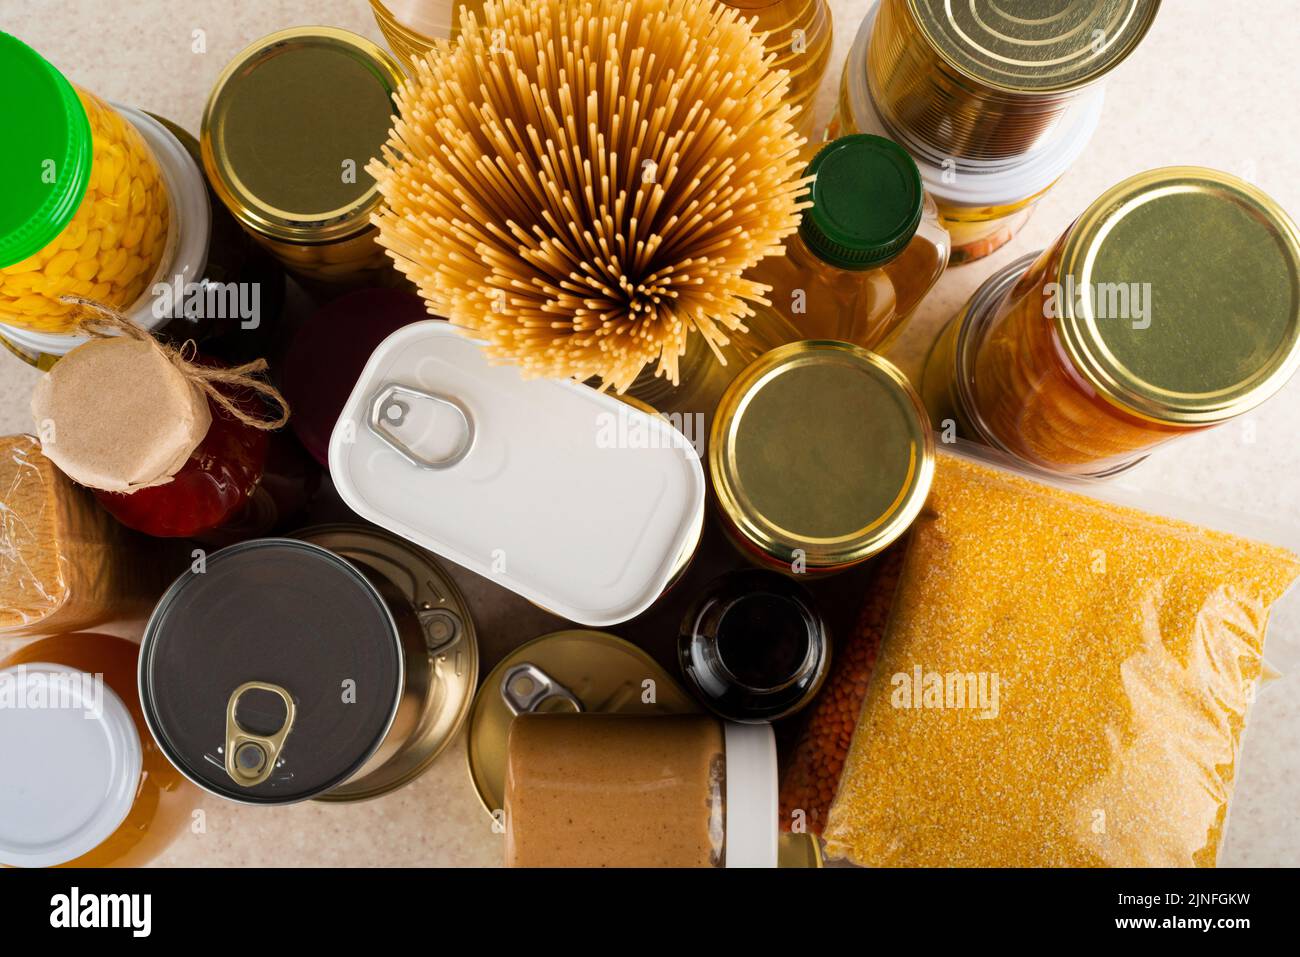 Emergency survival food set on white kitchen table high angle view Stock Photo